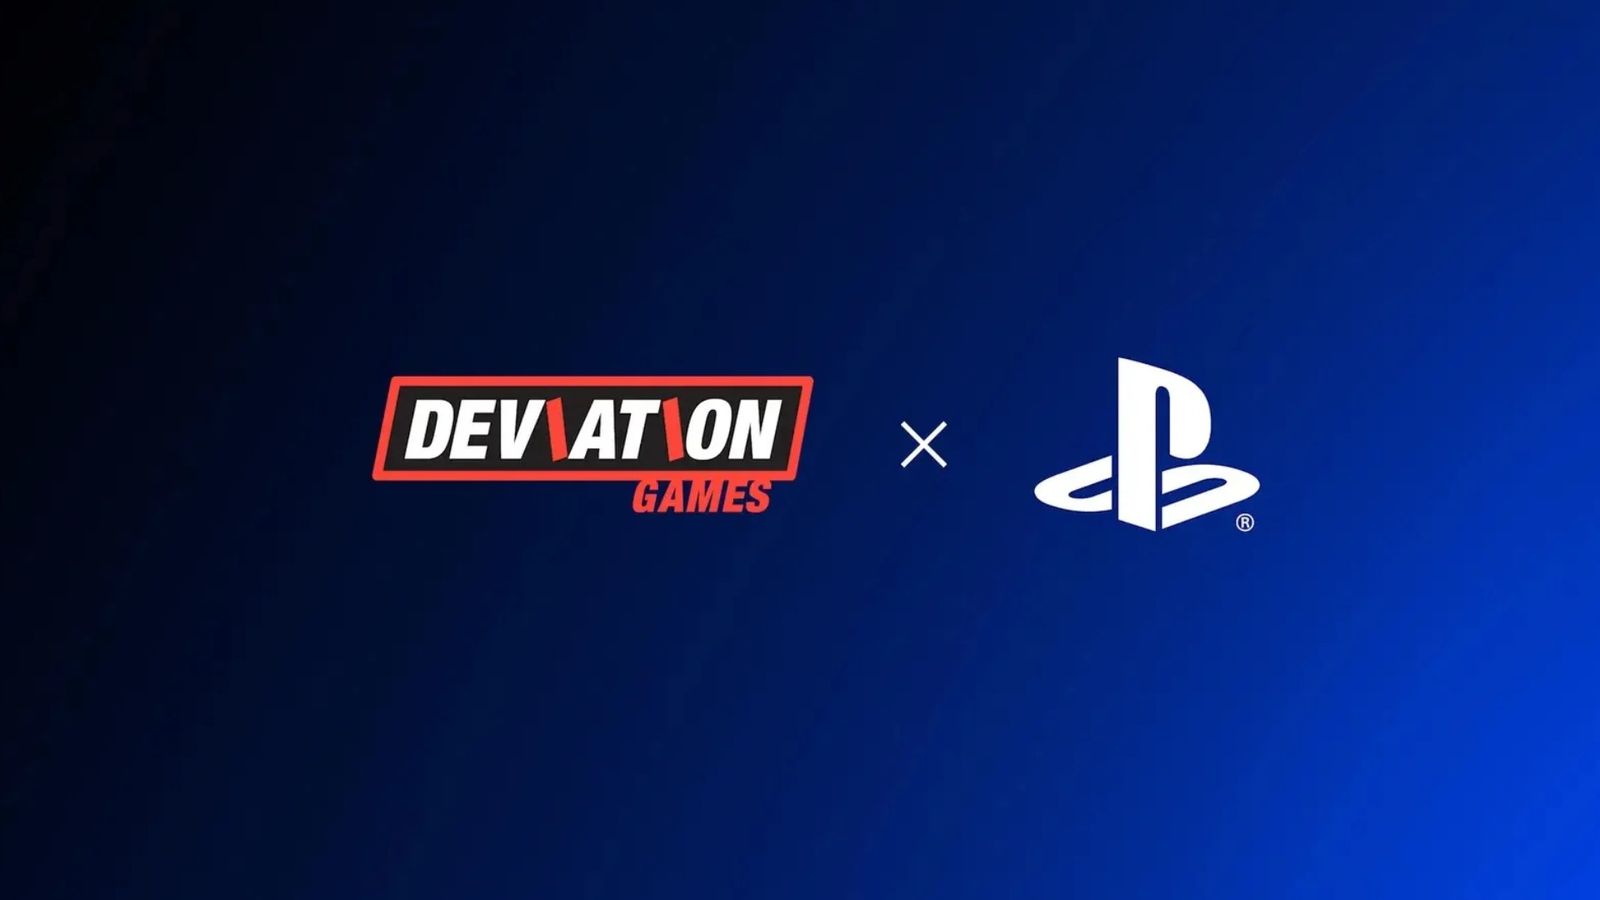 deviation games logo x playstation logo on blue gradient background to show new studio from employees